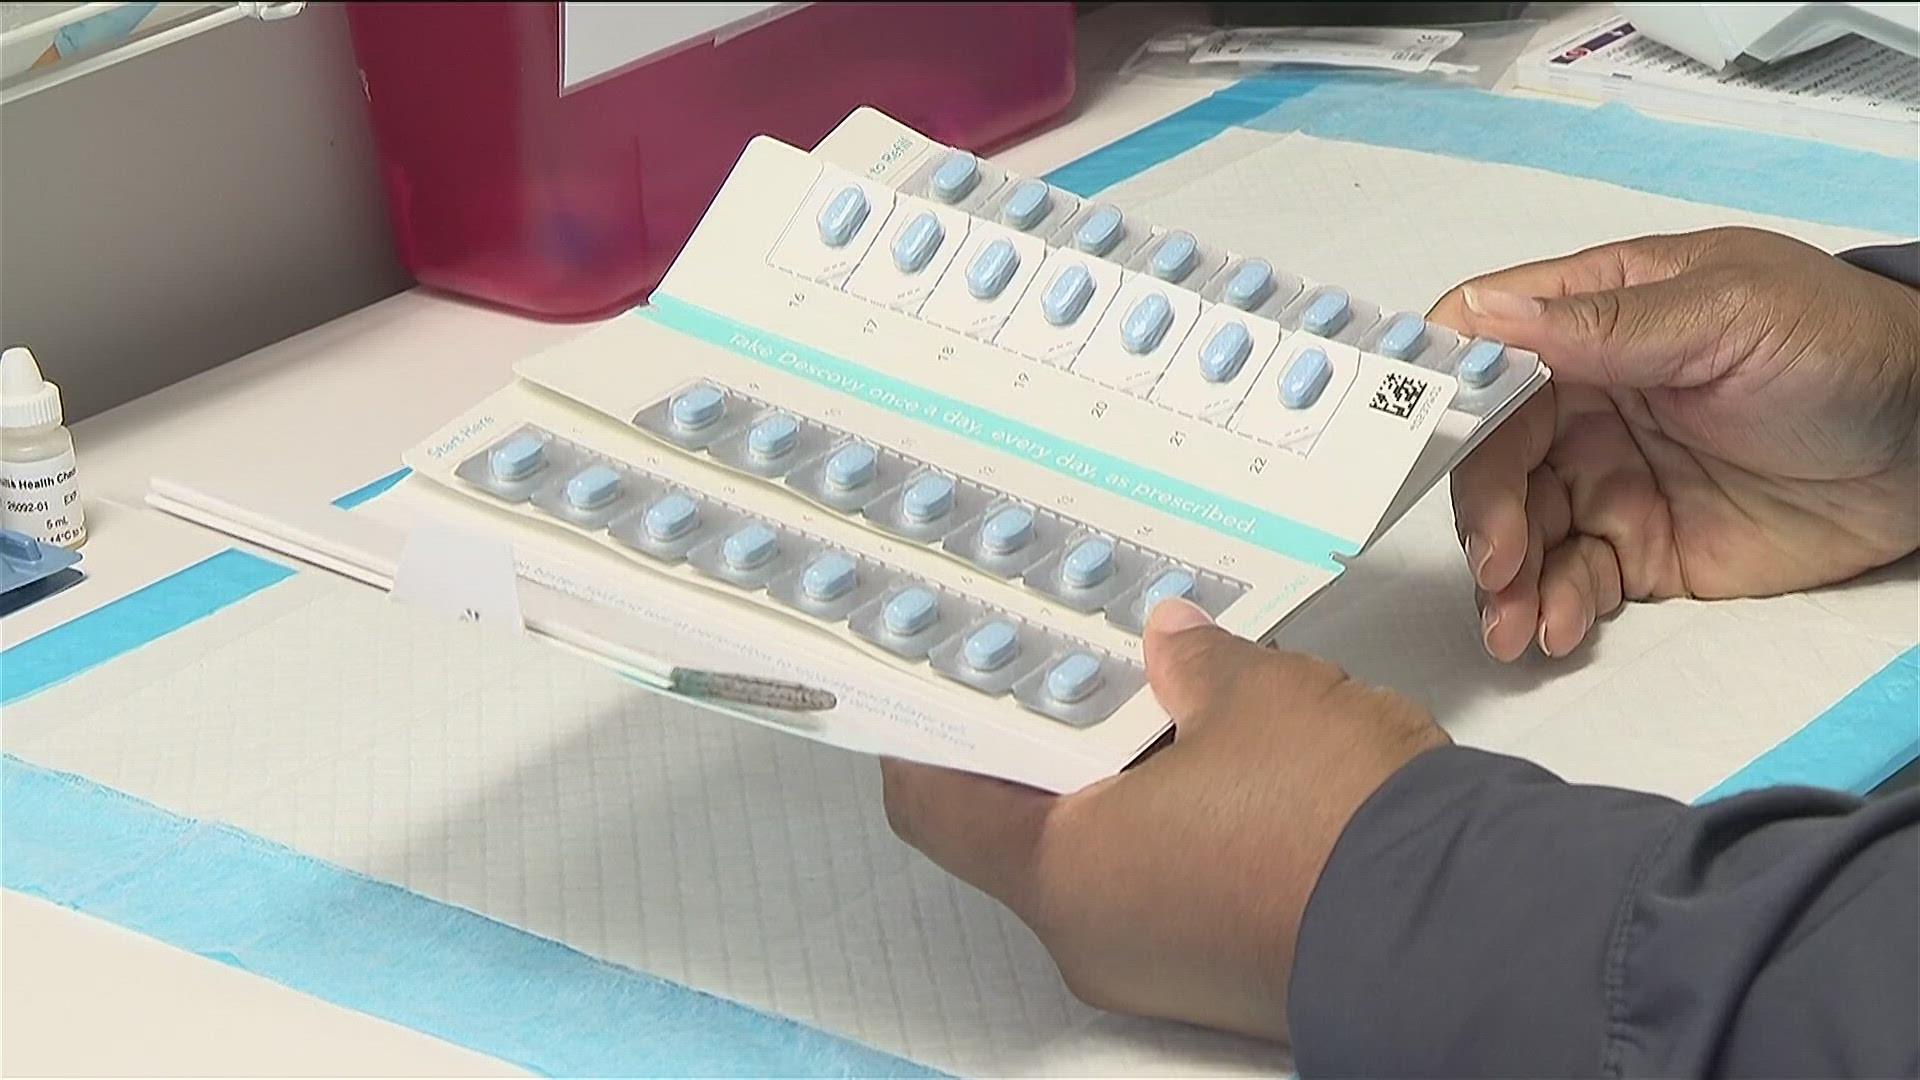 Organizations are working to provide PREP as HIV diagnoses are on the rise.